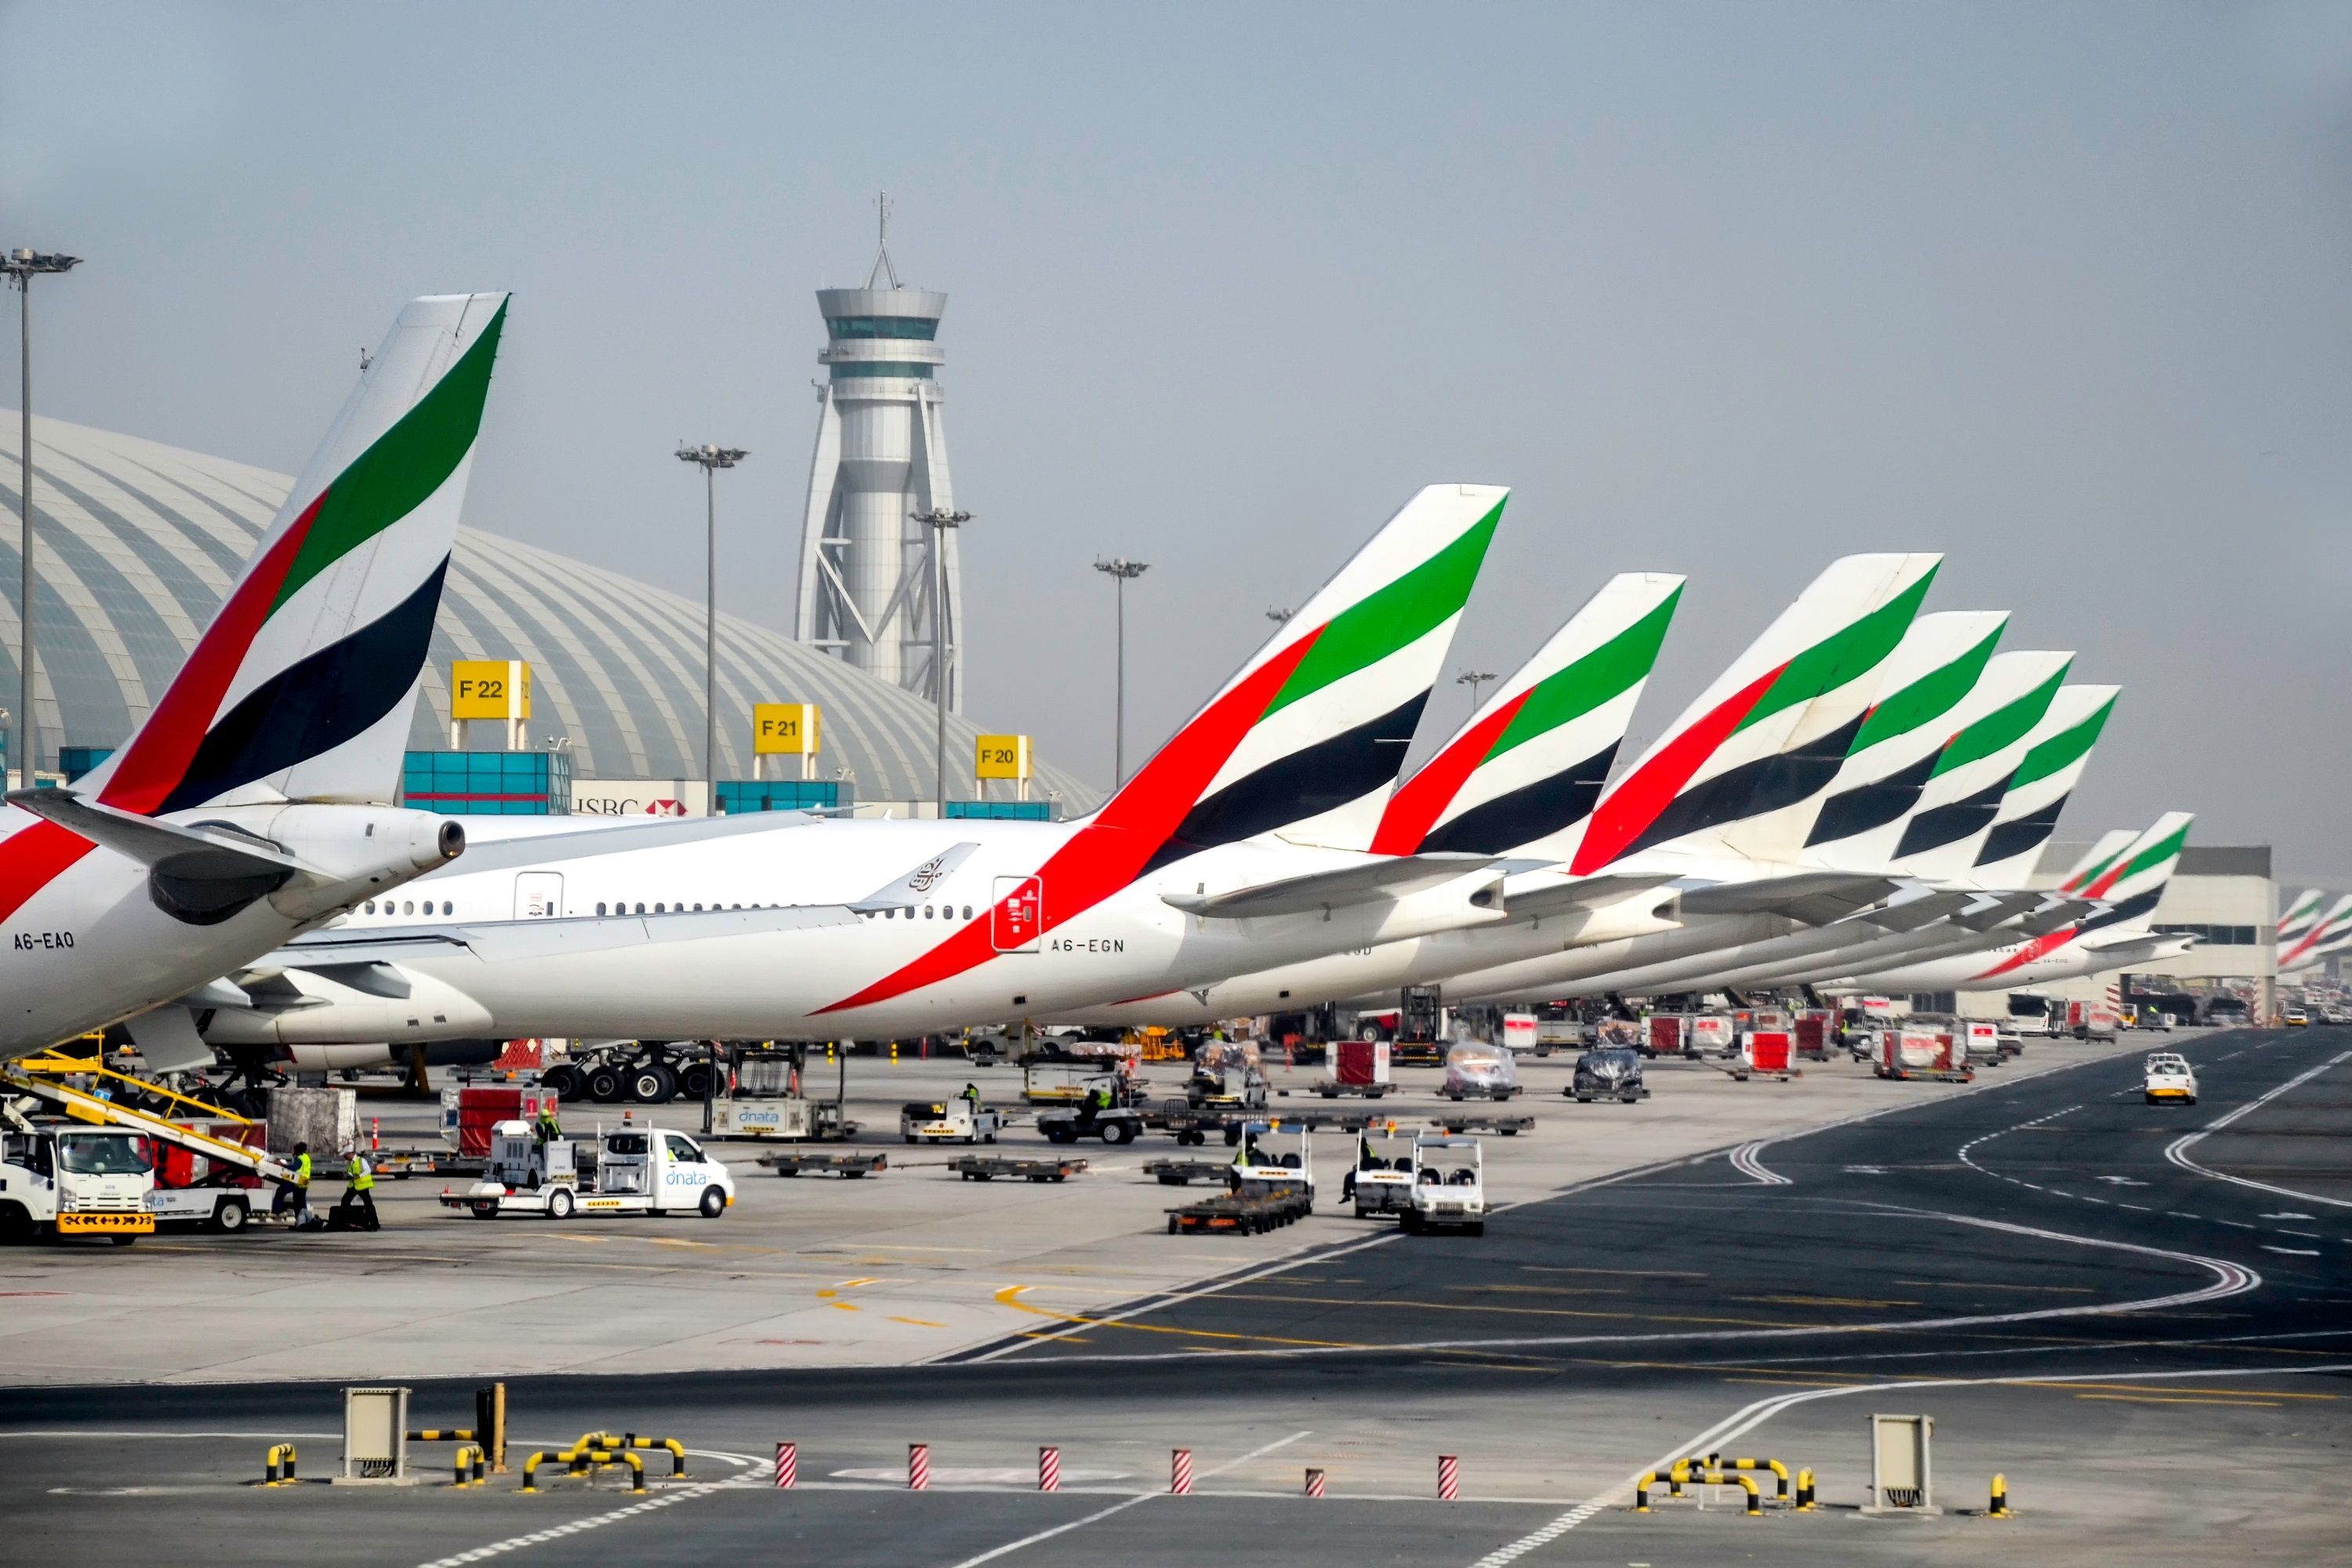 Emirates aircraft line up on stand.